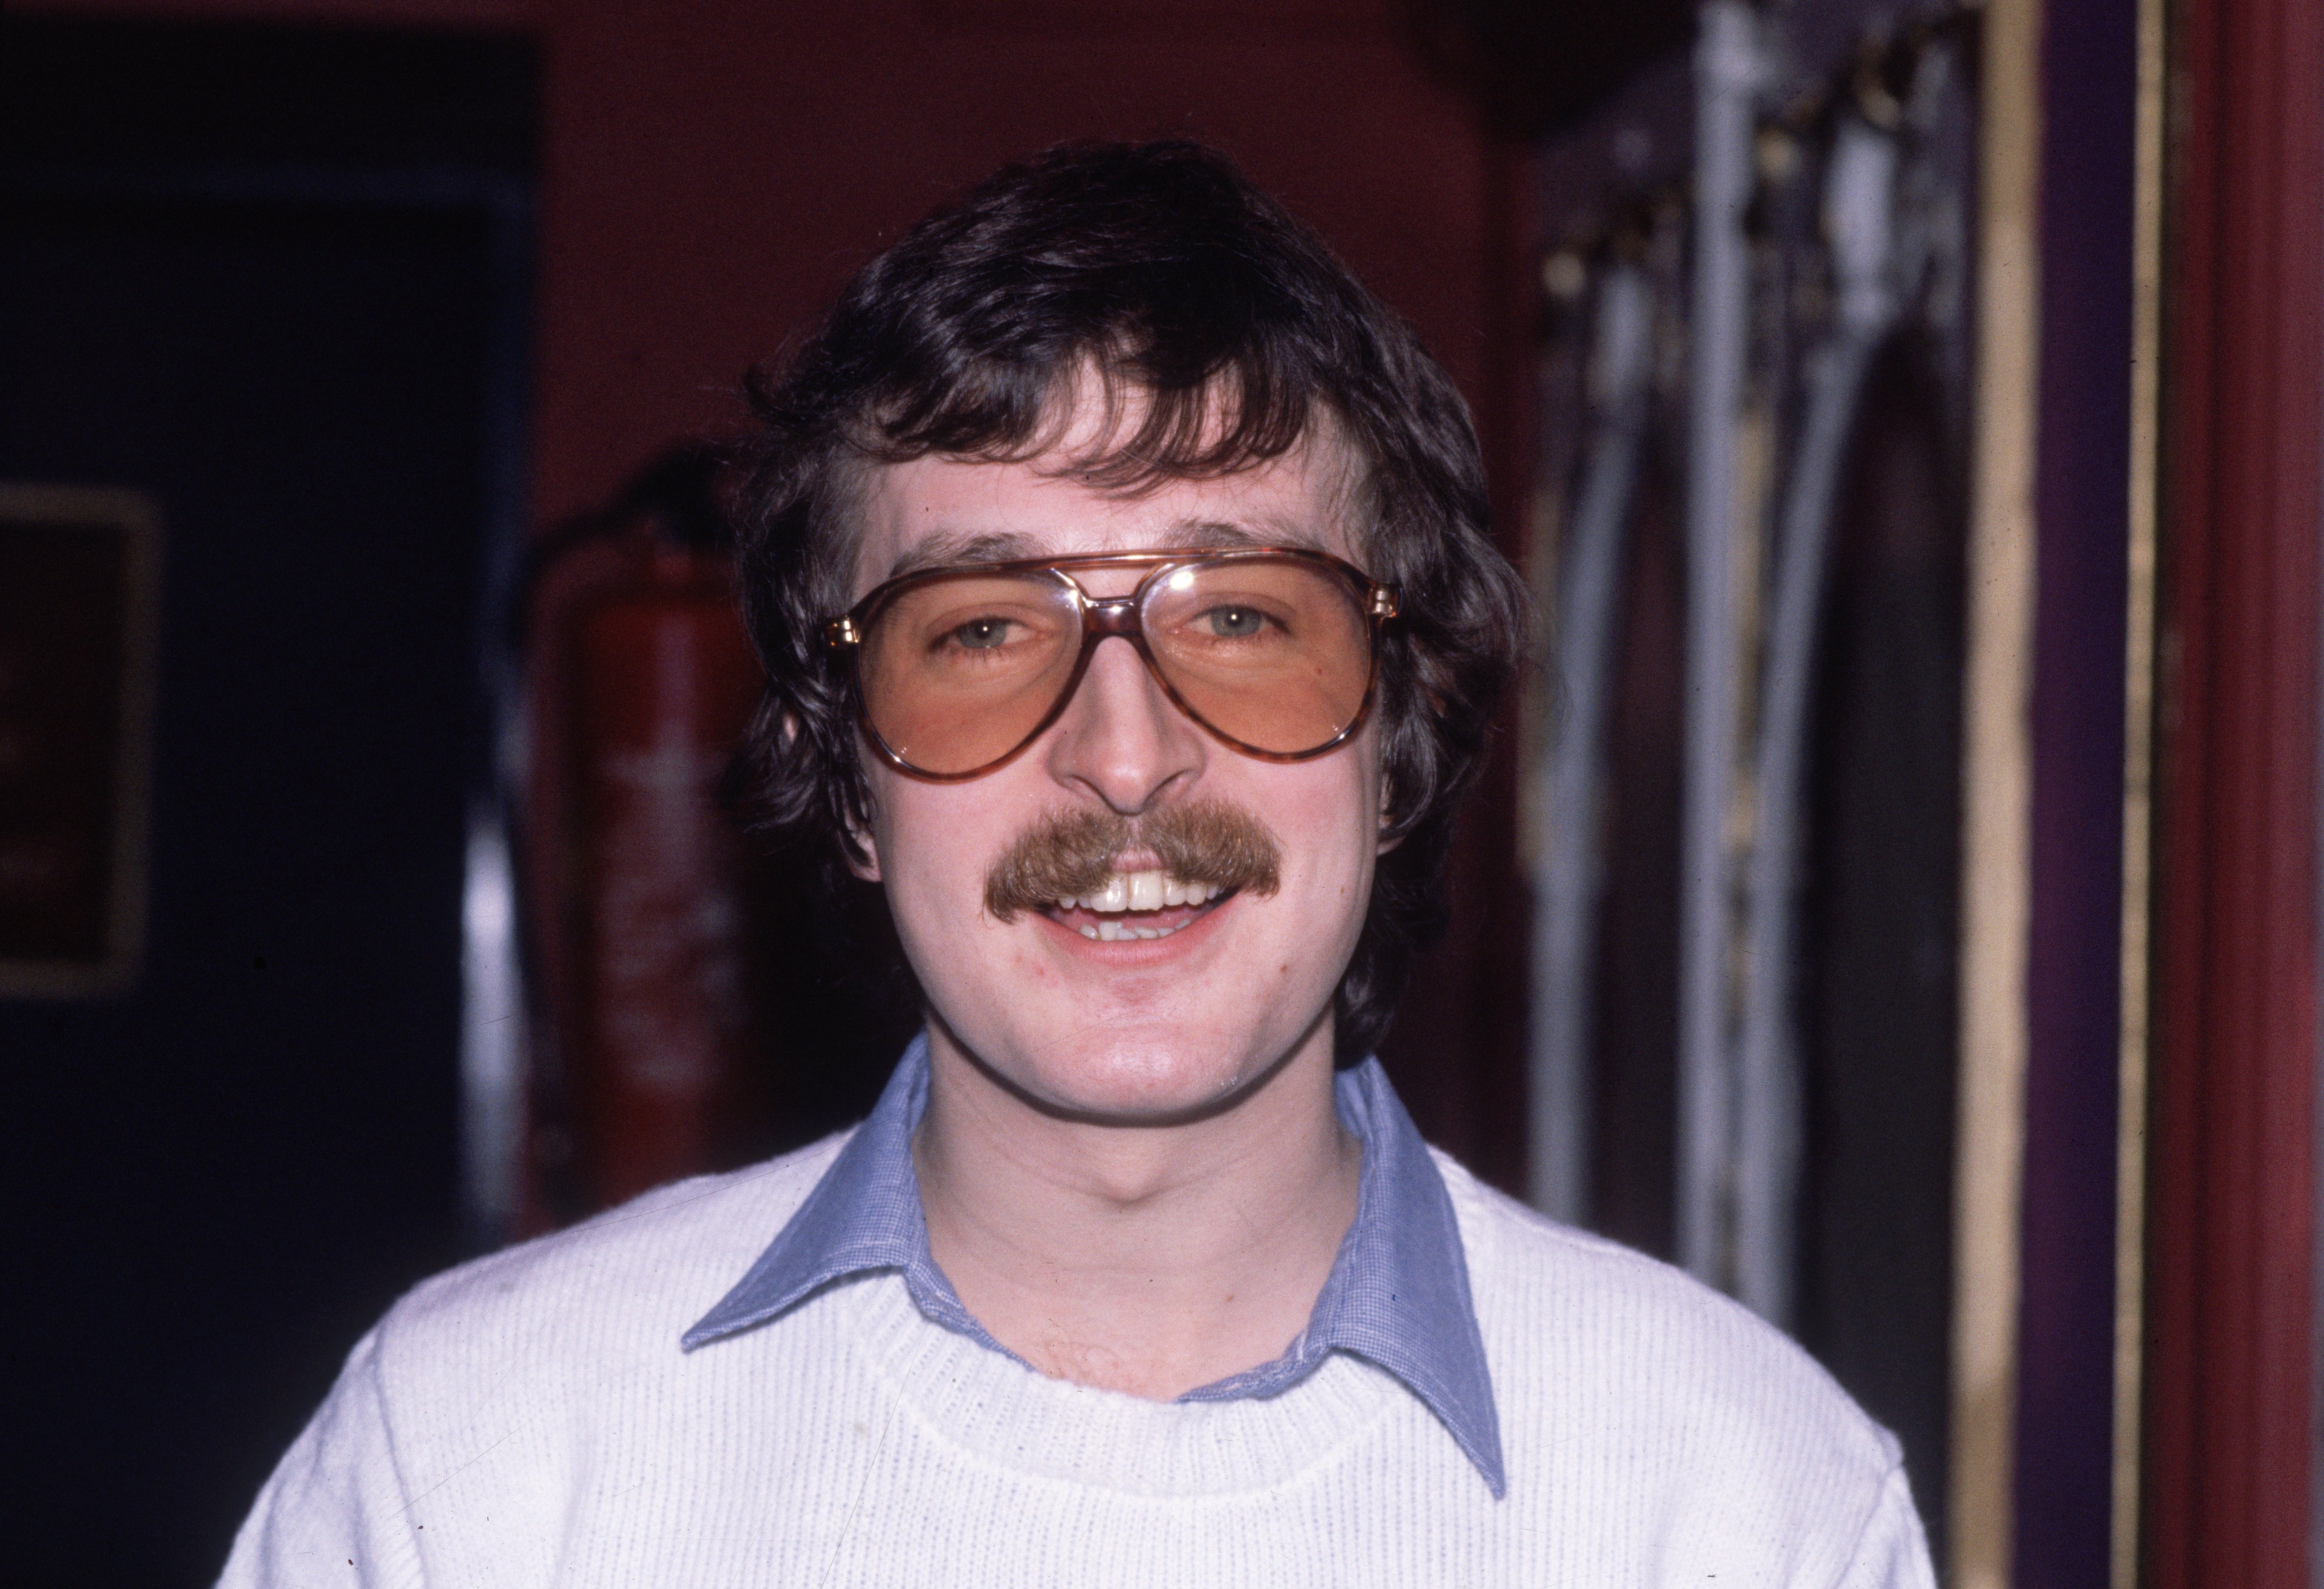 Wright photographed in 1981